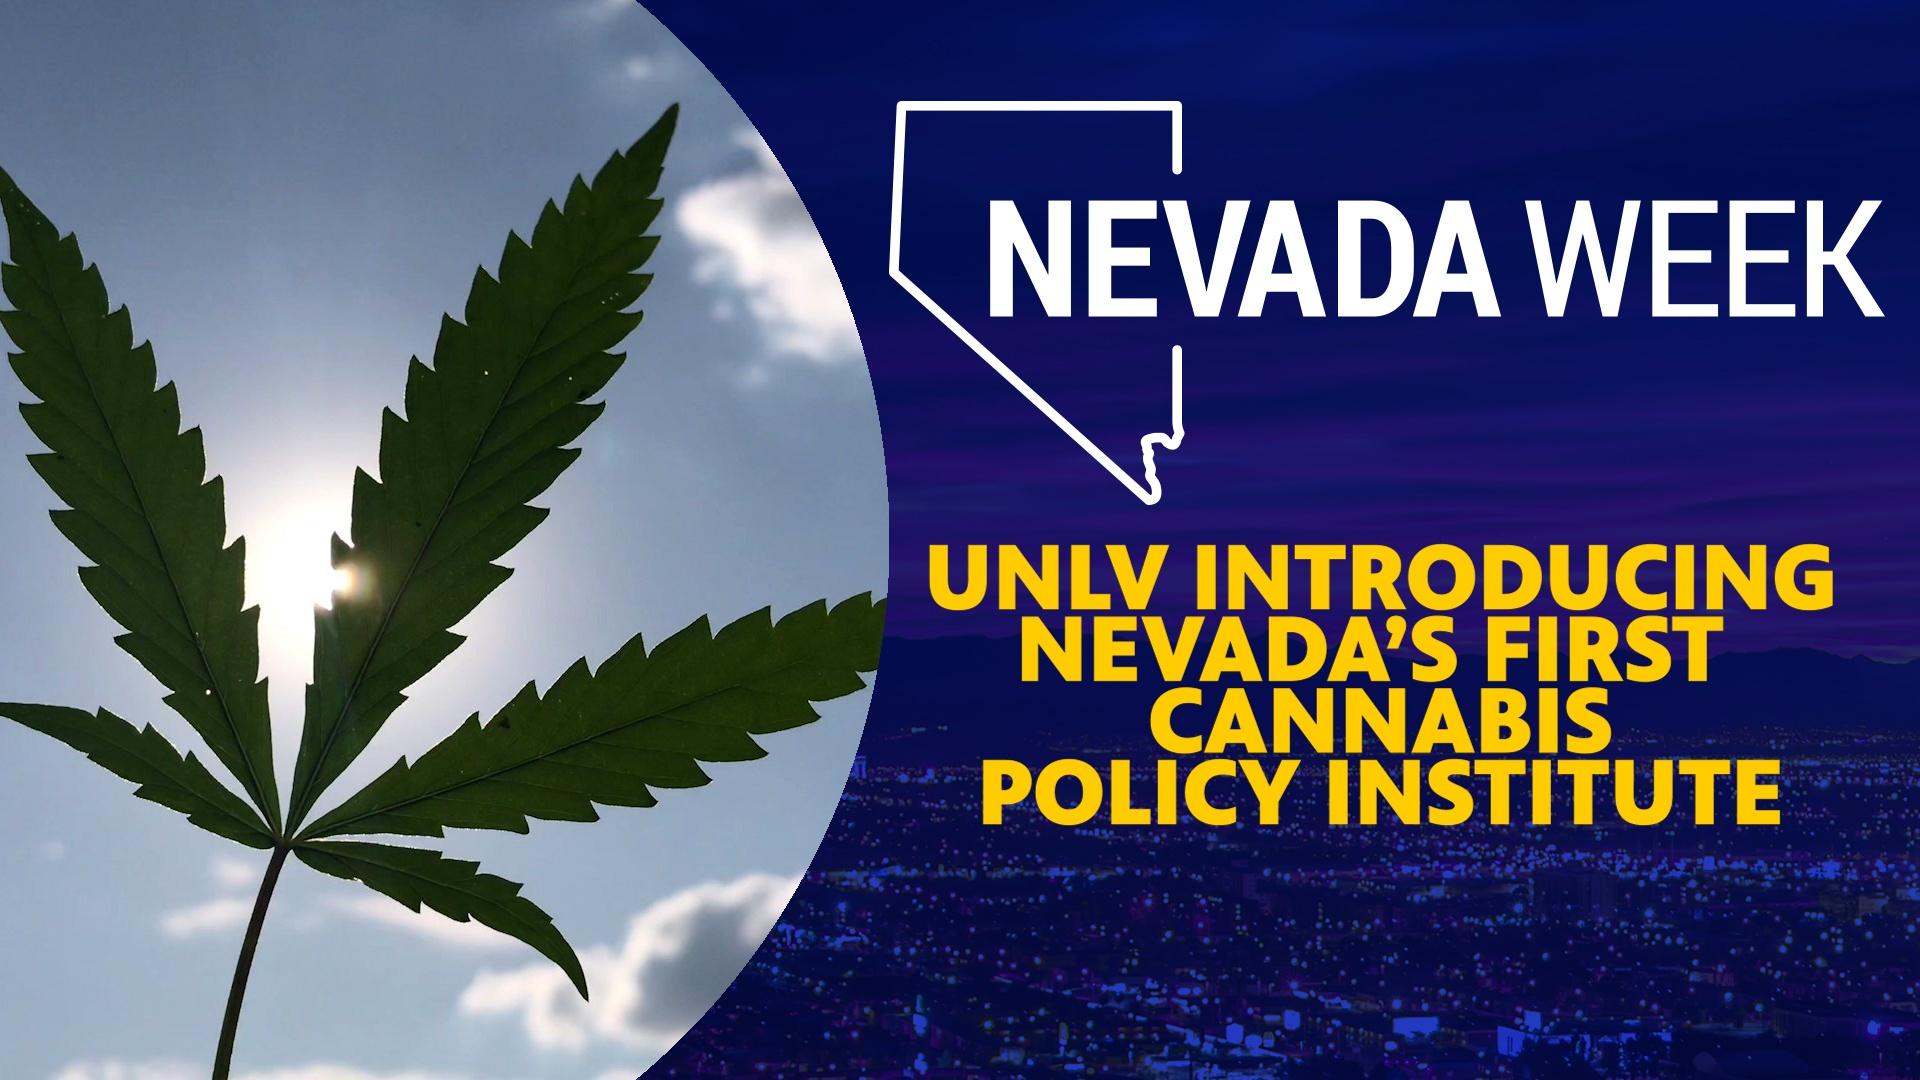 UNLV introducing Nevada’s First Cannabis Policy Institute